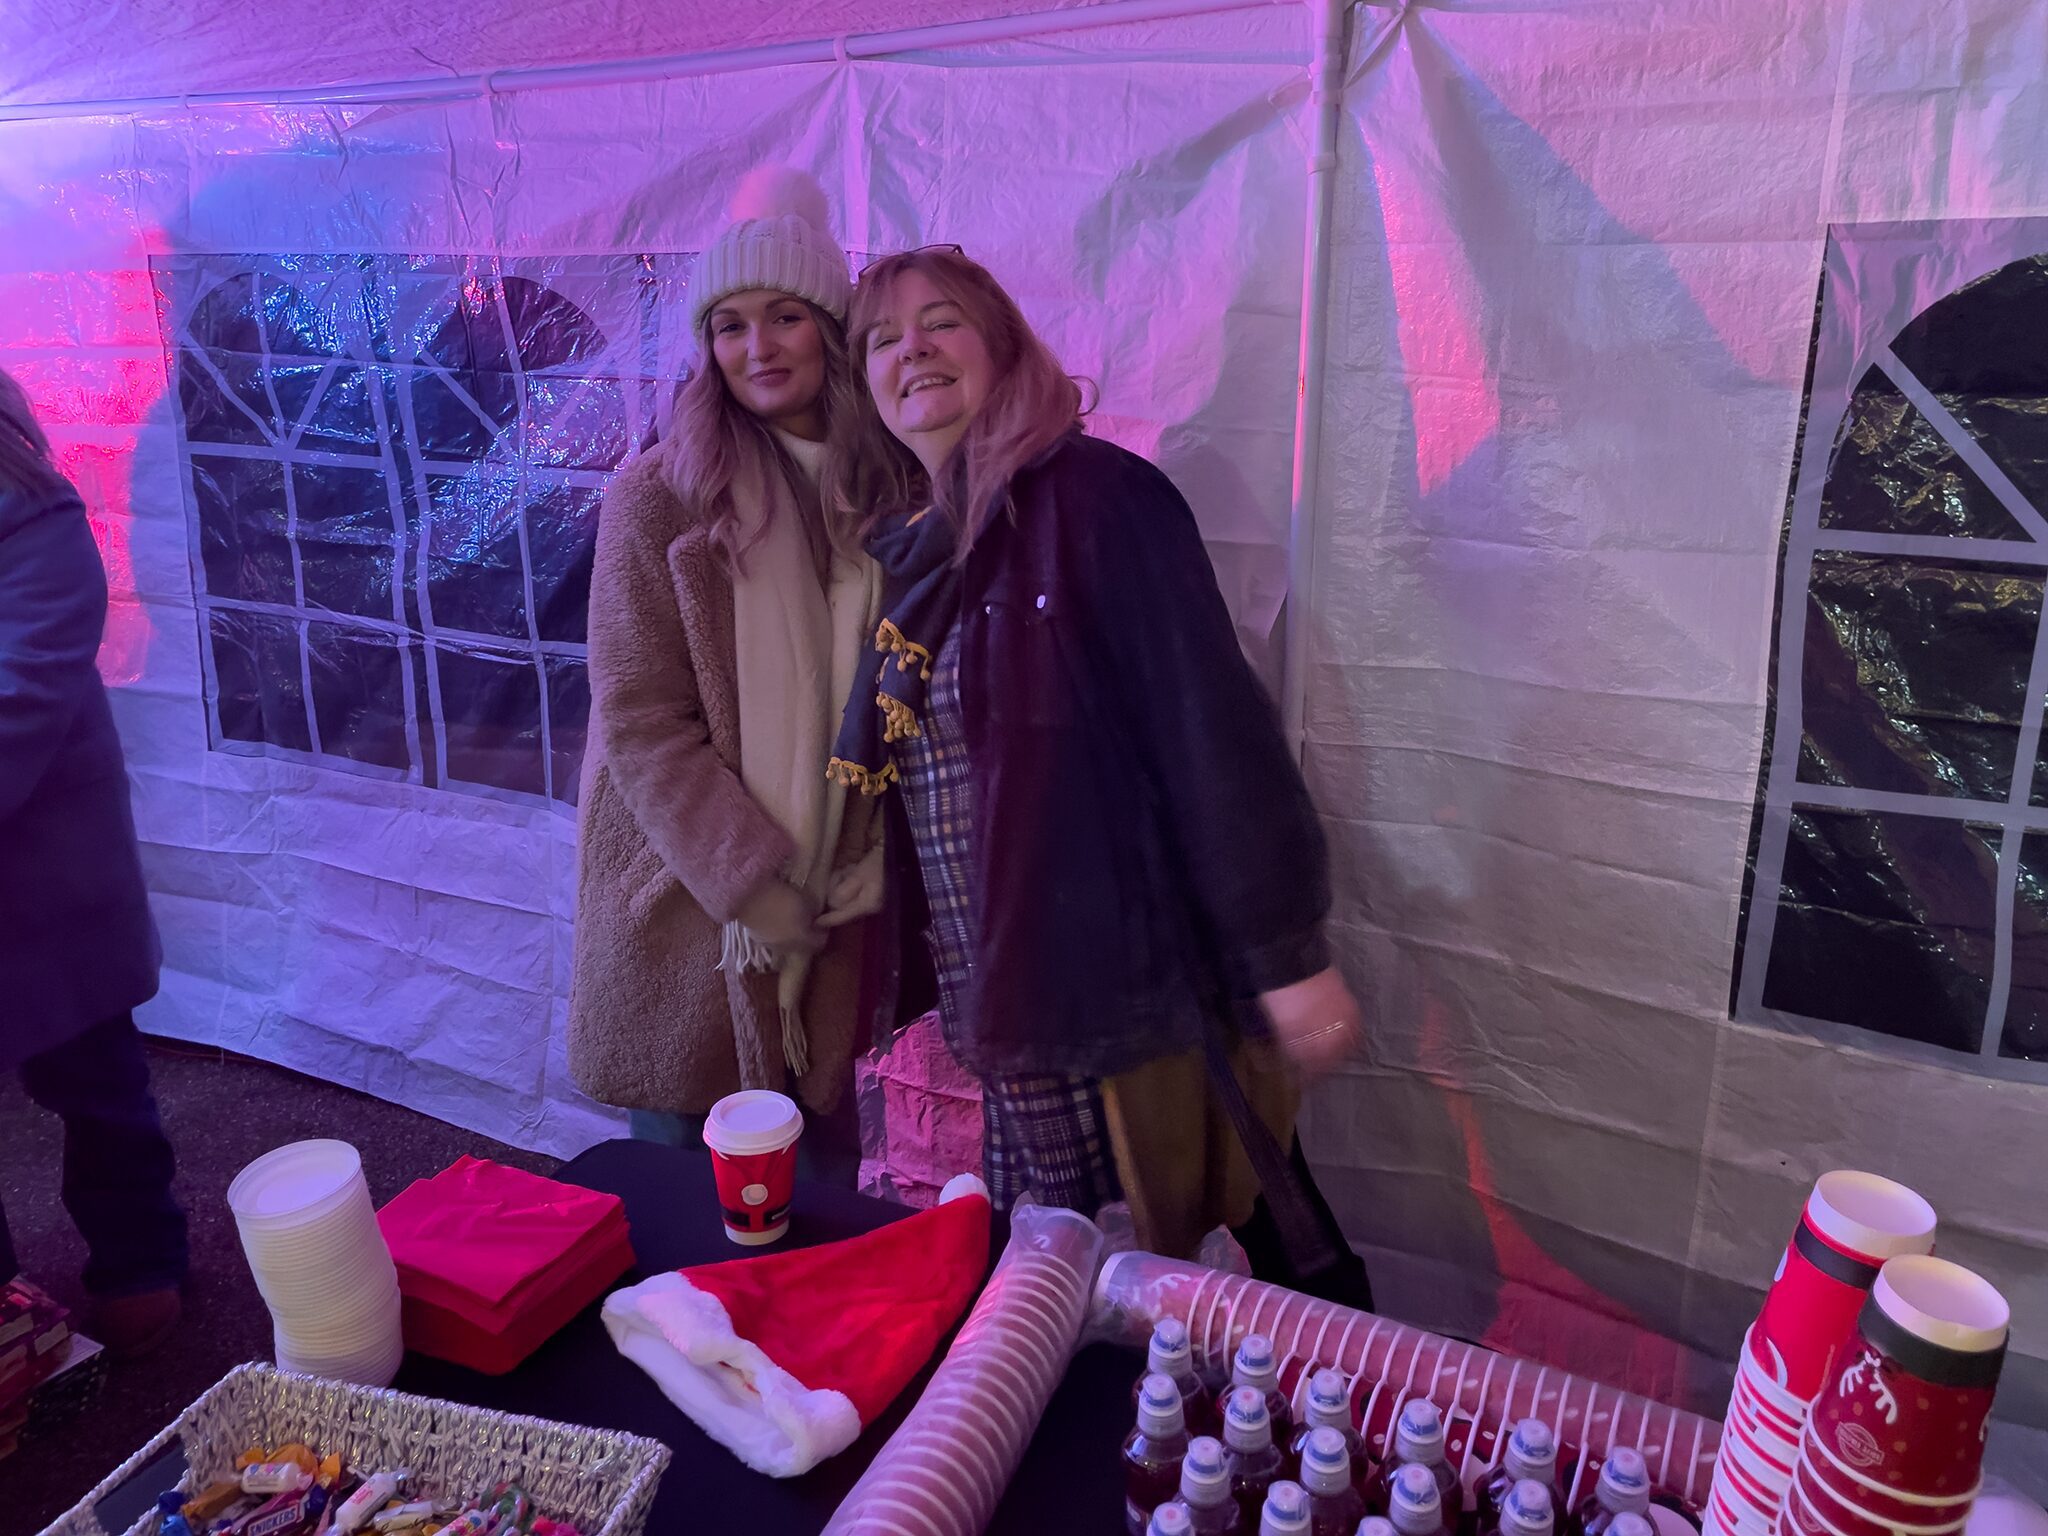 Steph and Bren at the Midhurst Christmas Street Party